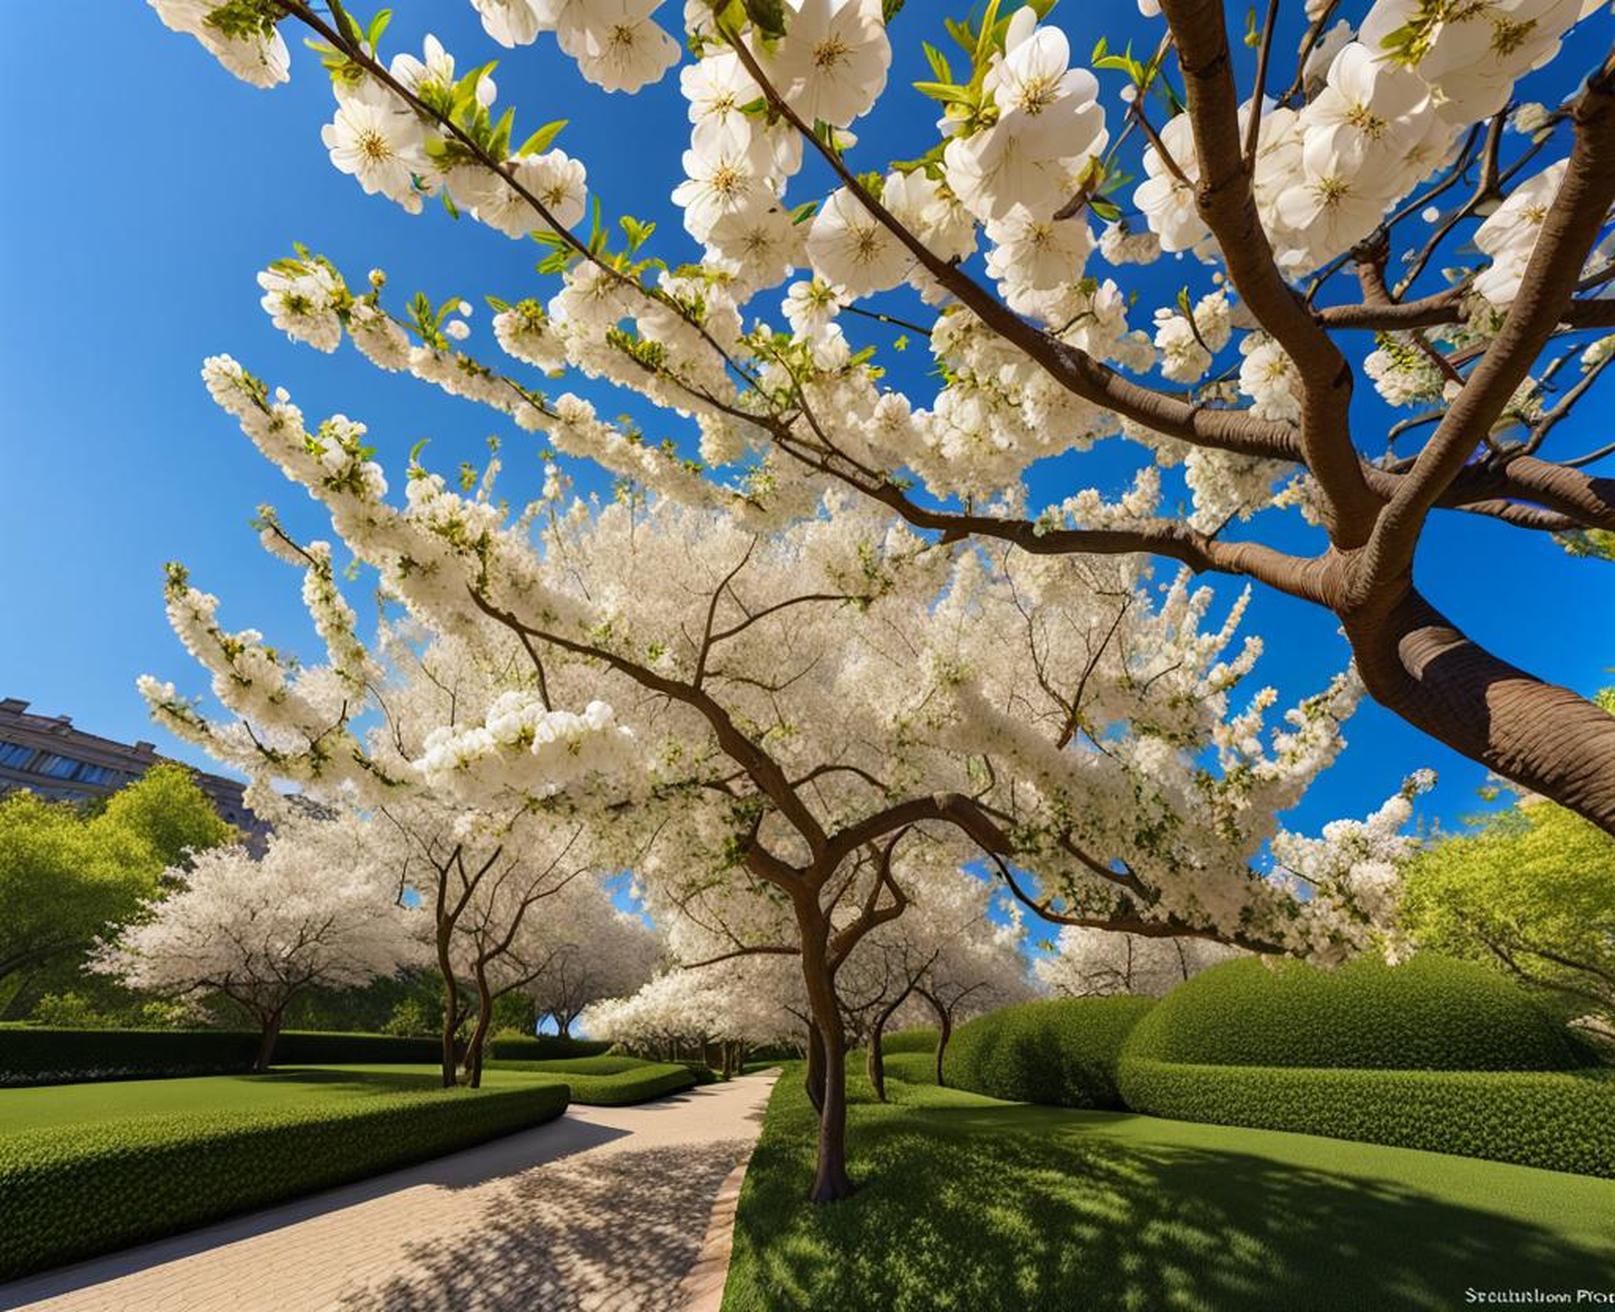 flowering trees with white blossoms